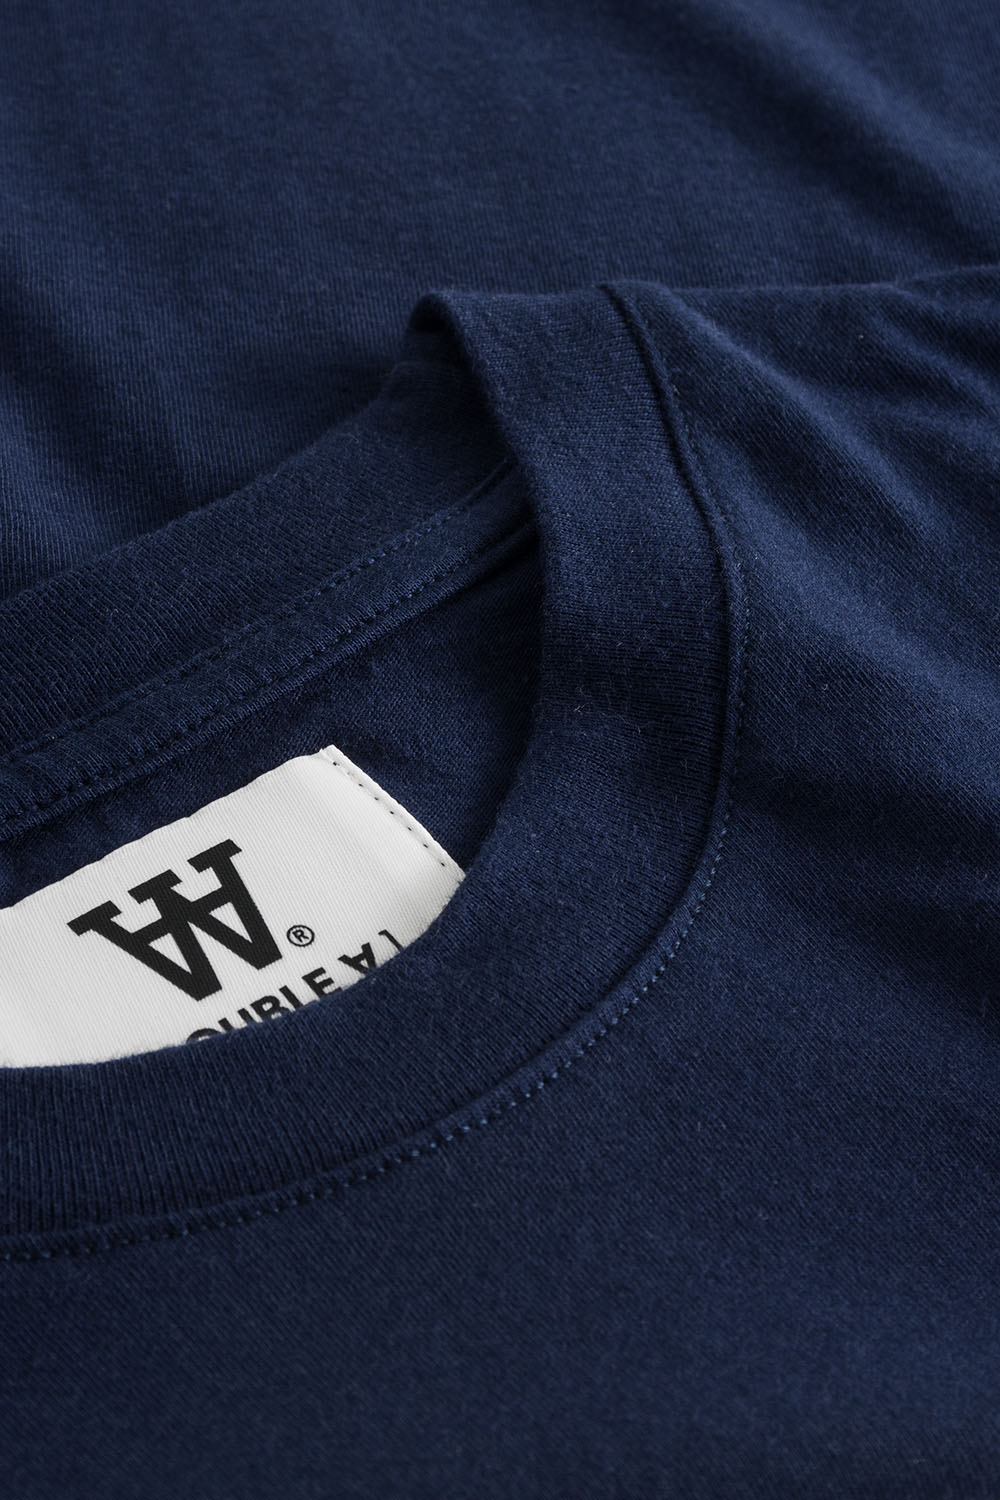 Double A by Wood Wood Mia T-shirt Navy | WoodWood.com